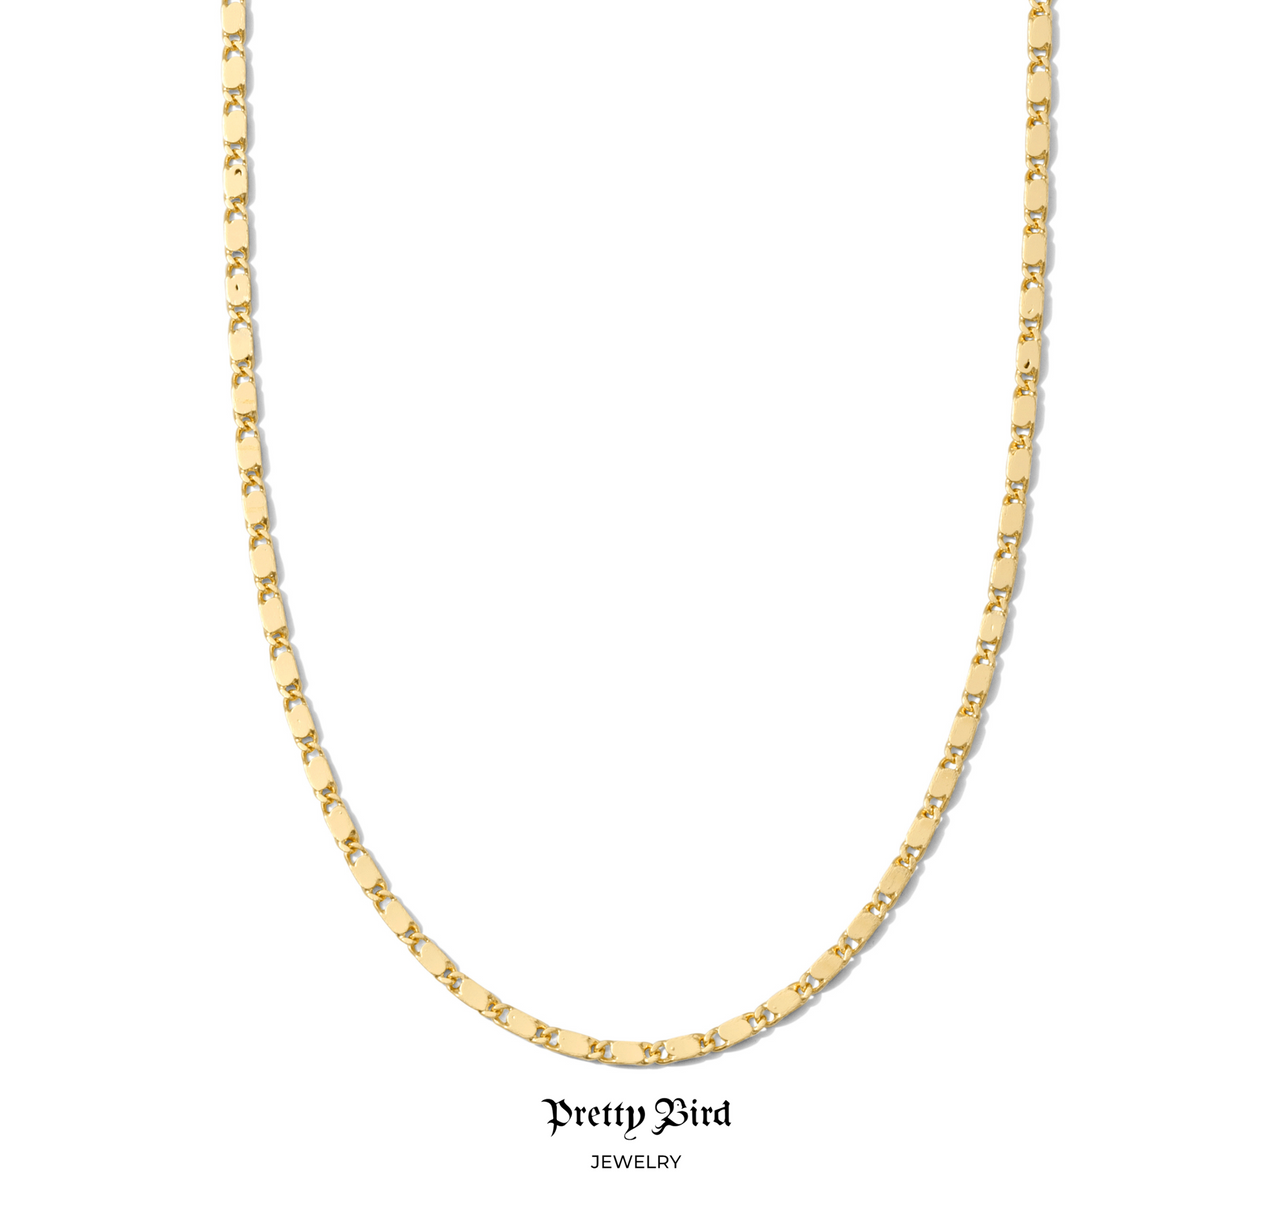 The Bar Link Mariner Chain Necklace